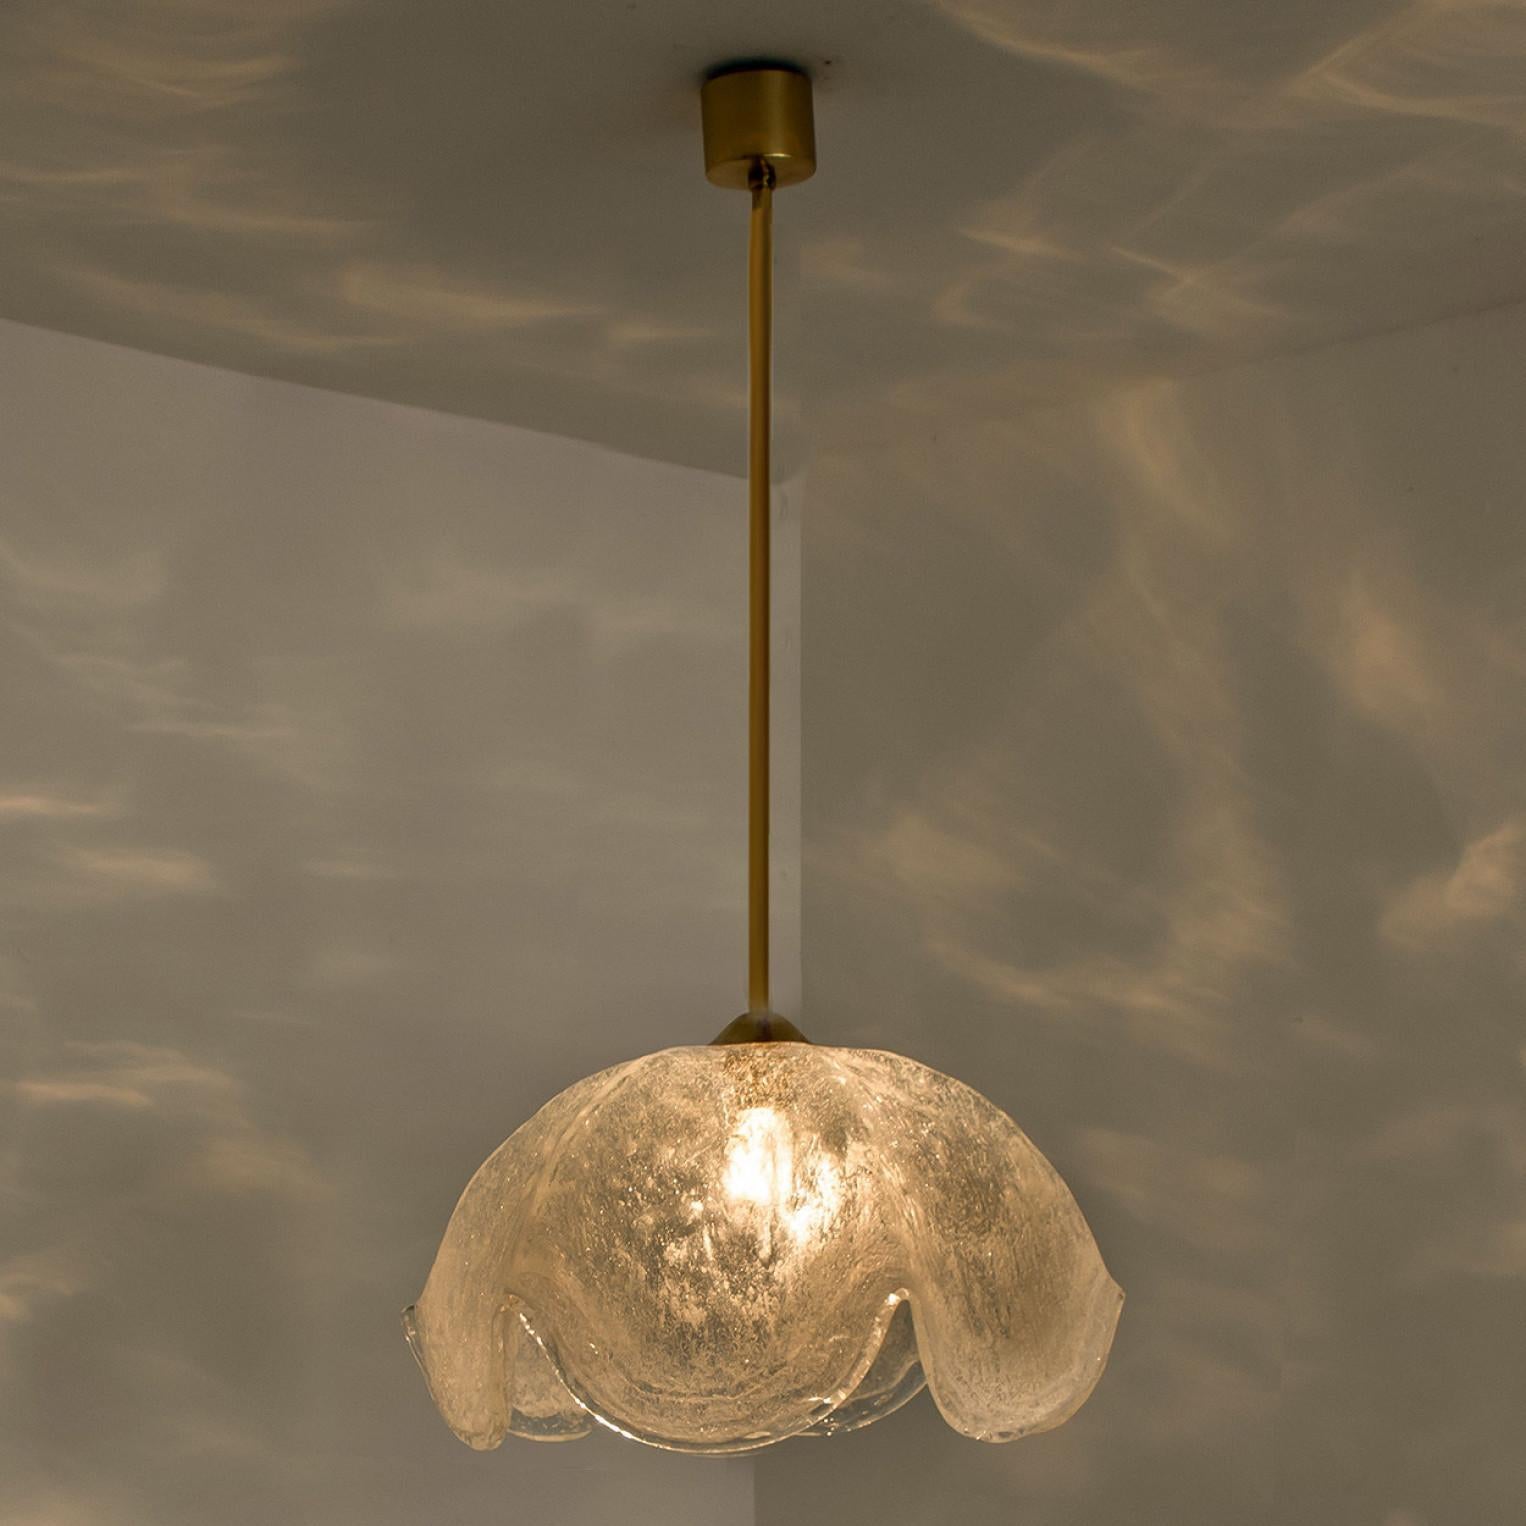 Mid-20th Century Clear Glass Flower Pendant Lamp by Kaiser, Leuchten, Germany For Sale